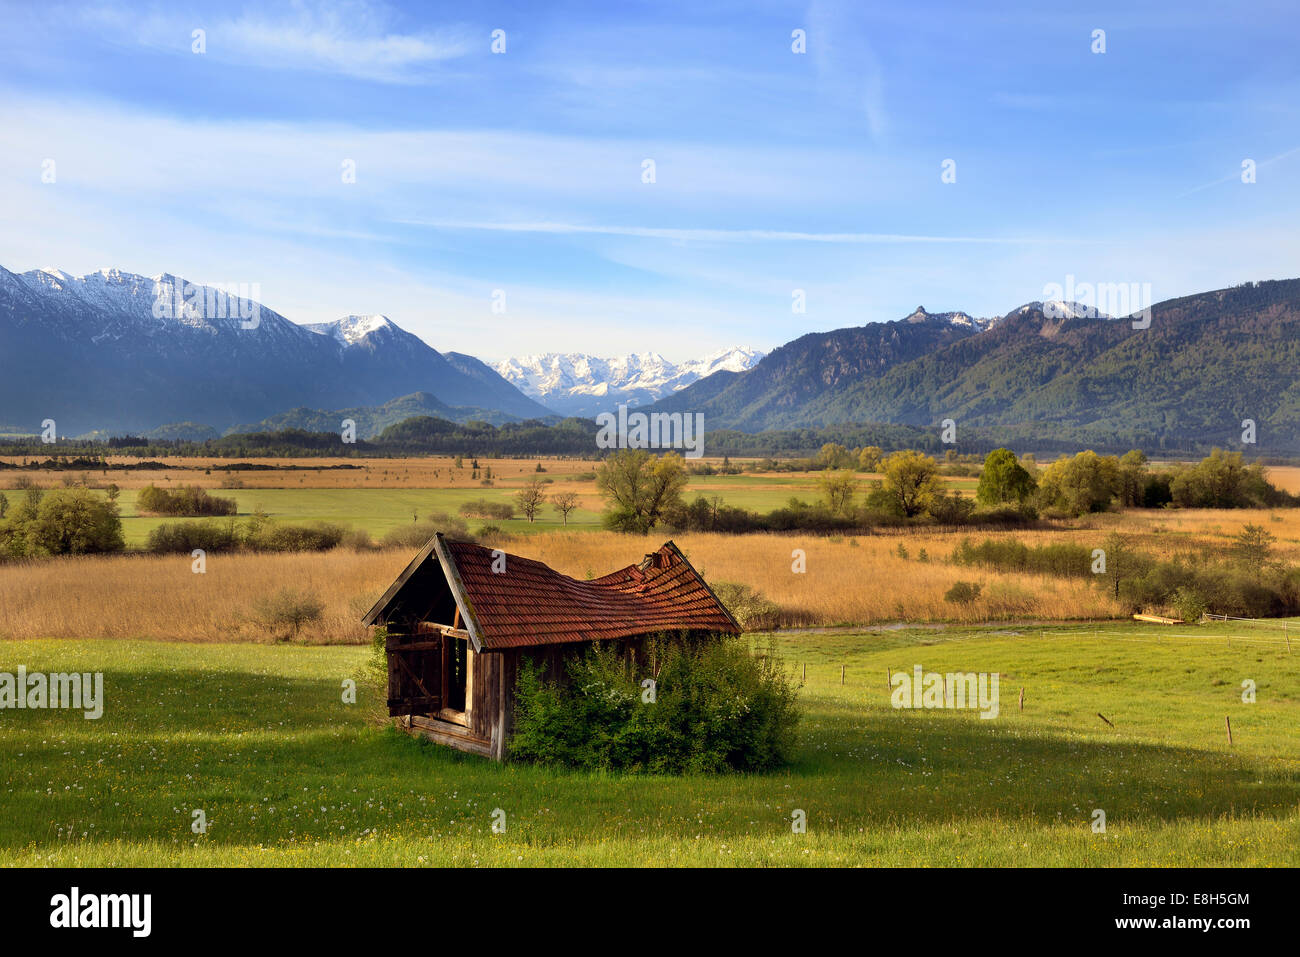 Germany, Upper Bavaria, Murnauer Moos and Ester mountains Stock Photo